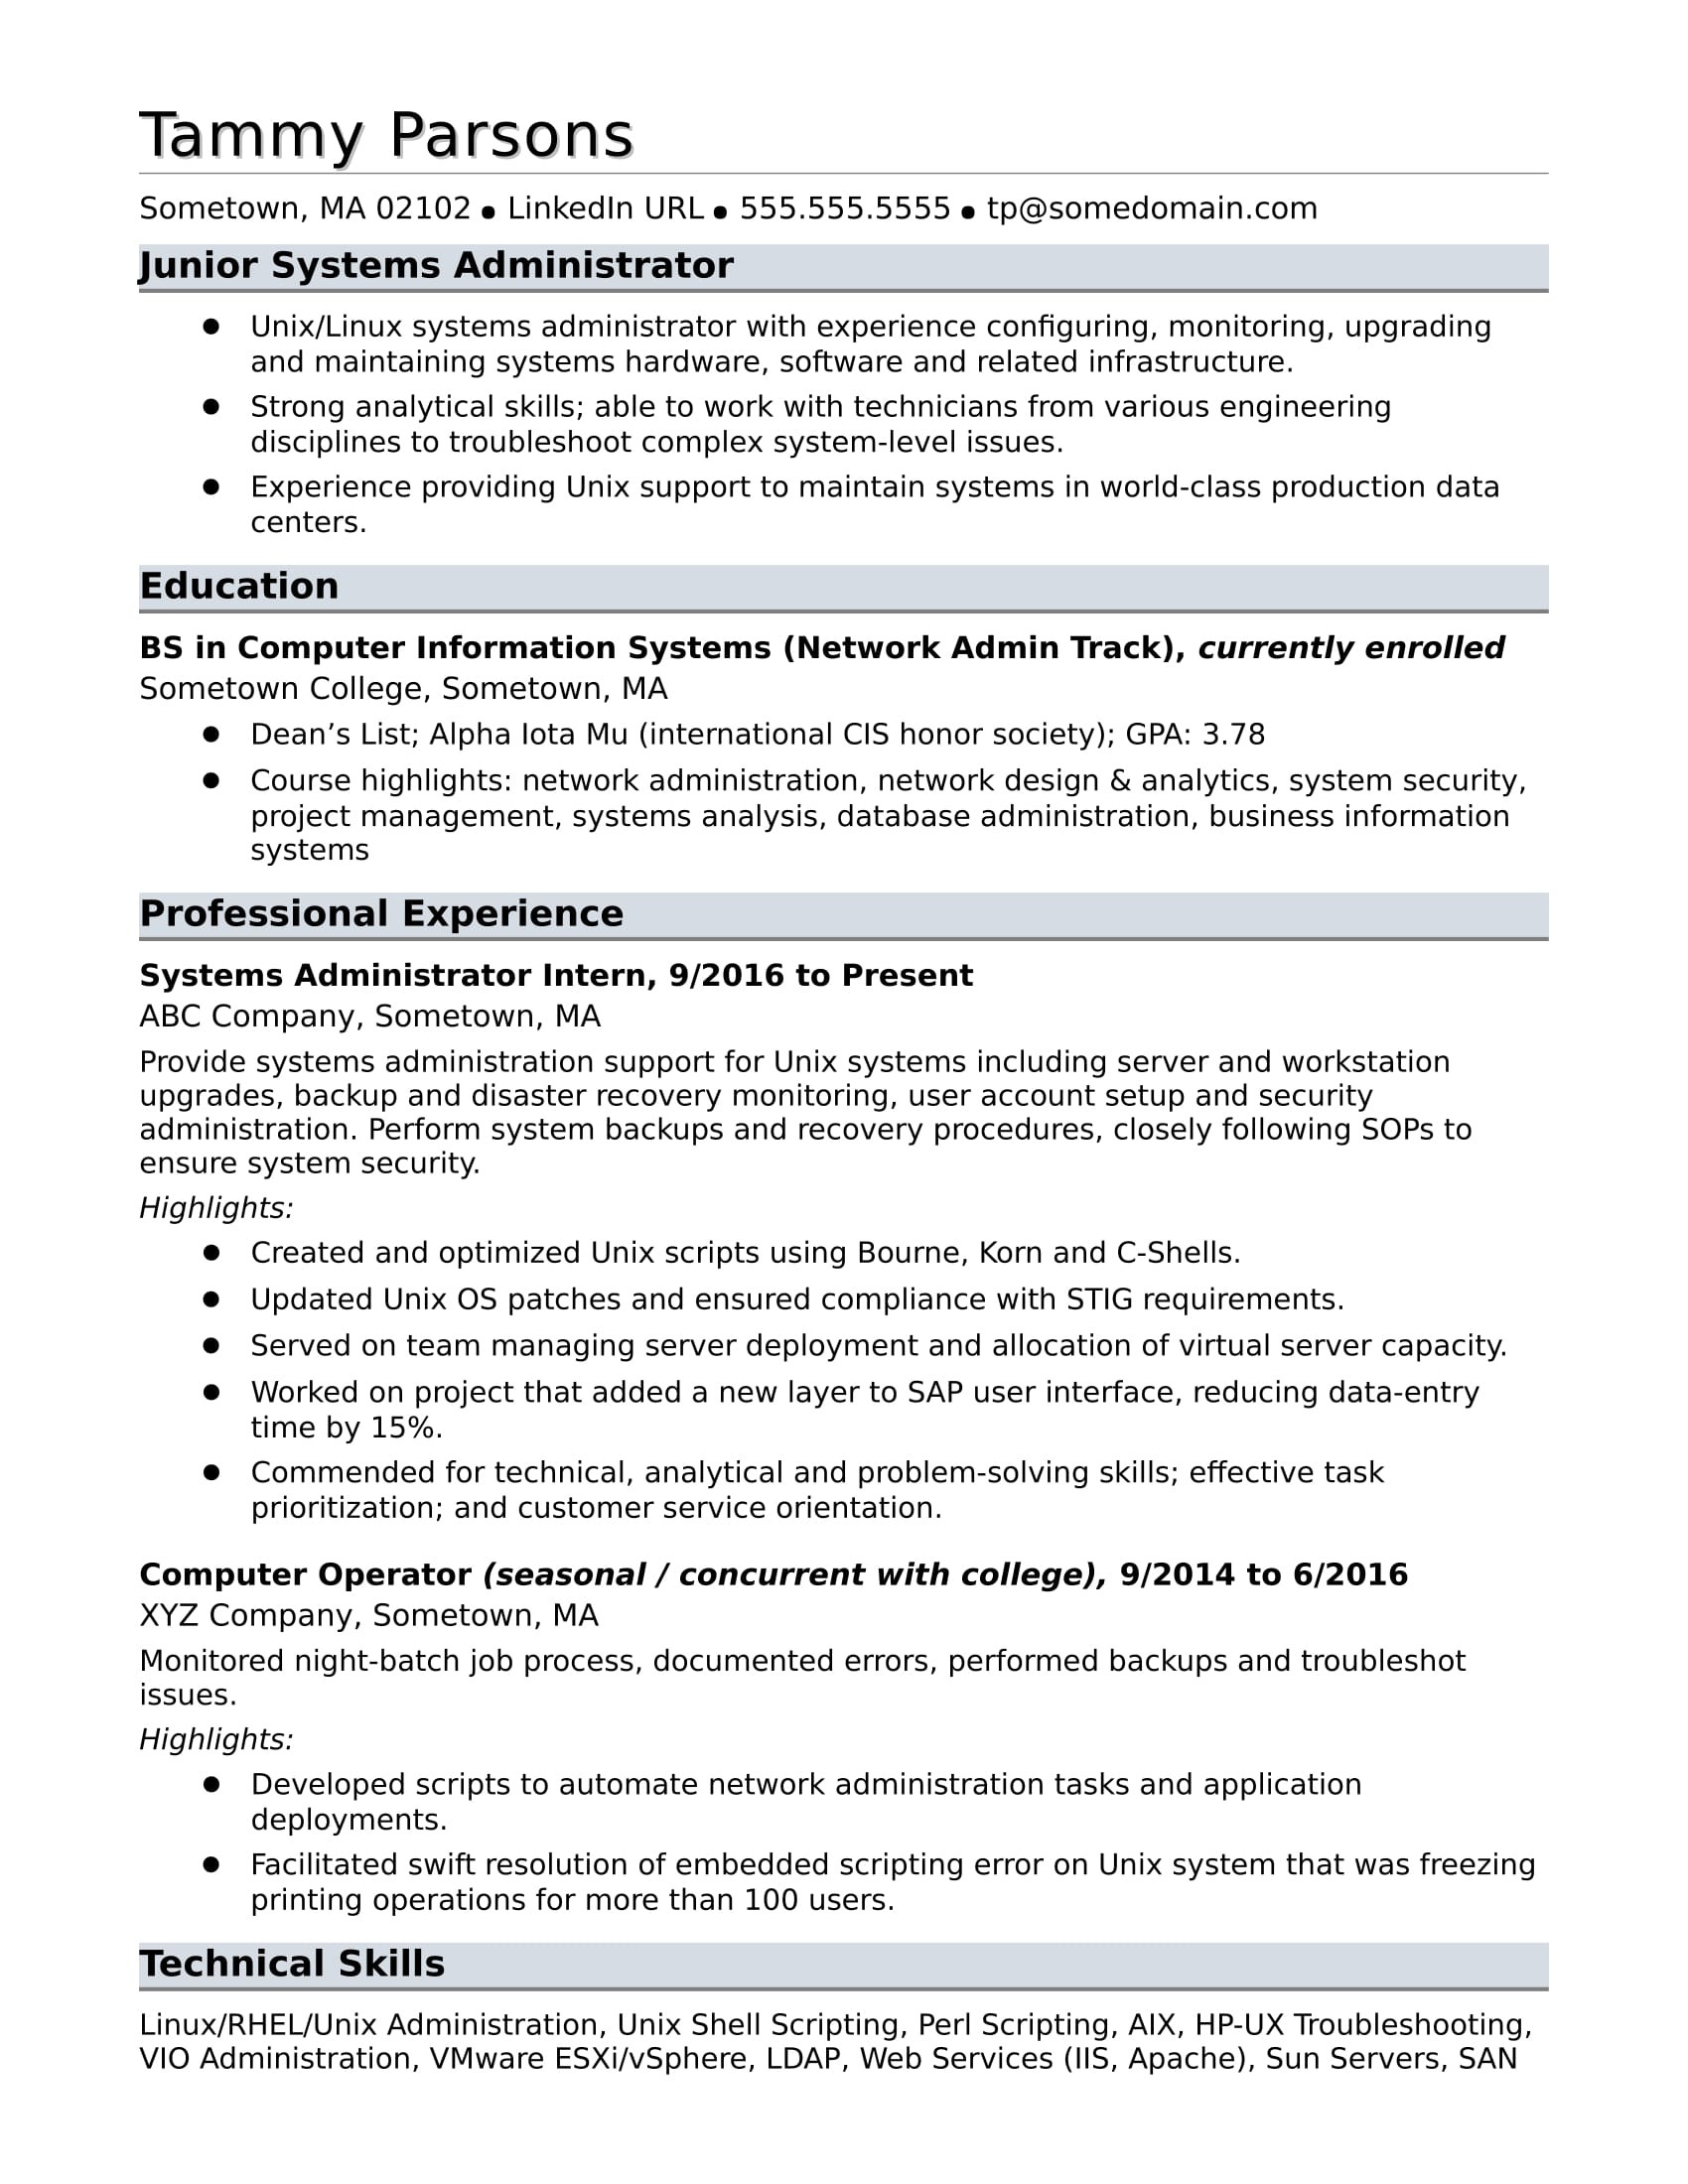 Sample Resume for School Principal Position In India Sample Resume for An Entry-level Systems Administrator Monster.com